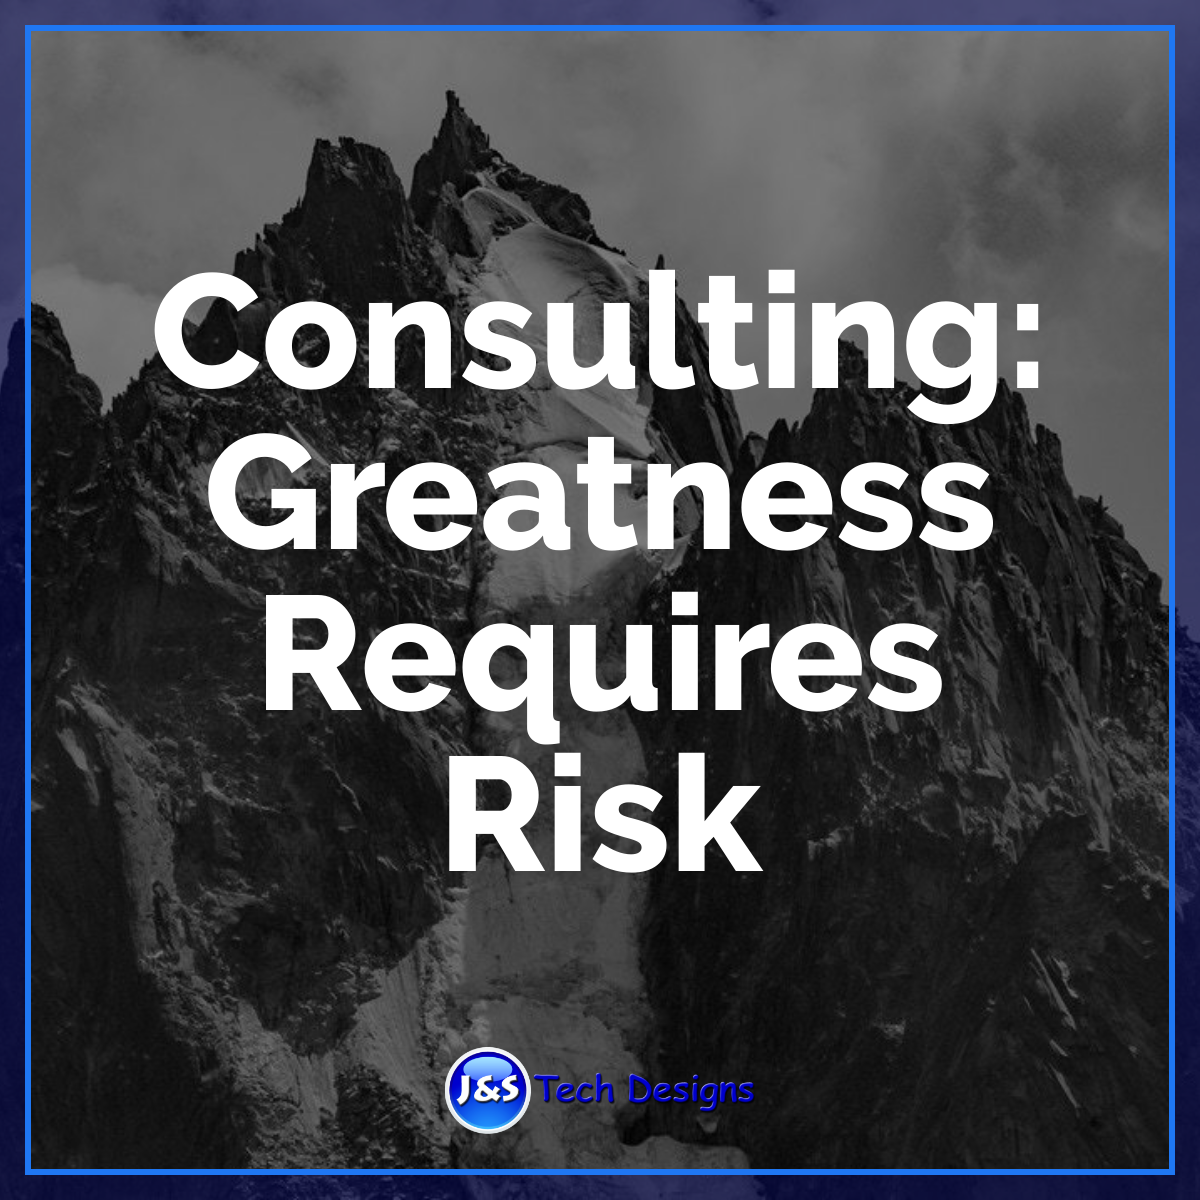 Consulting: Greatness Requires Risk